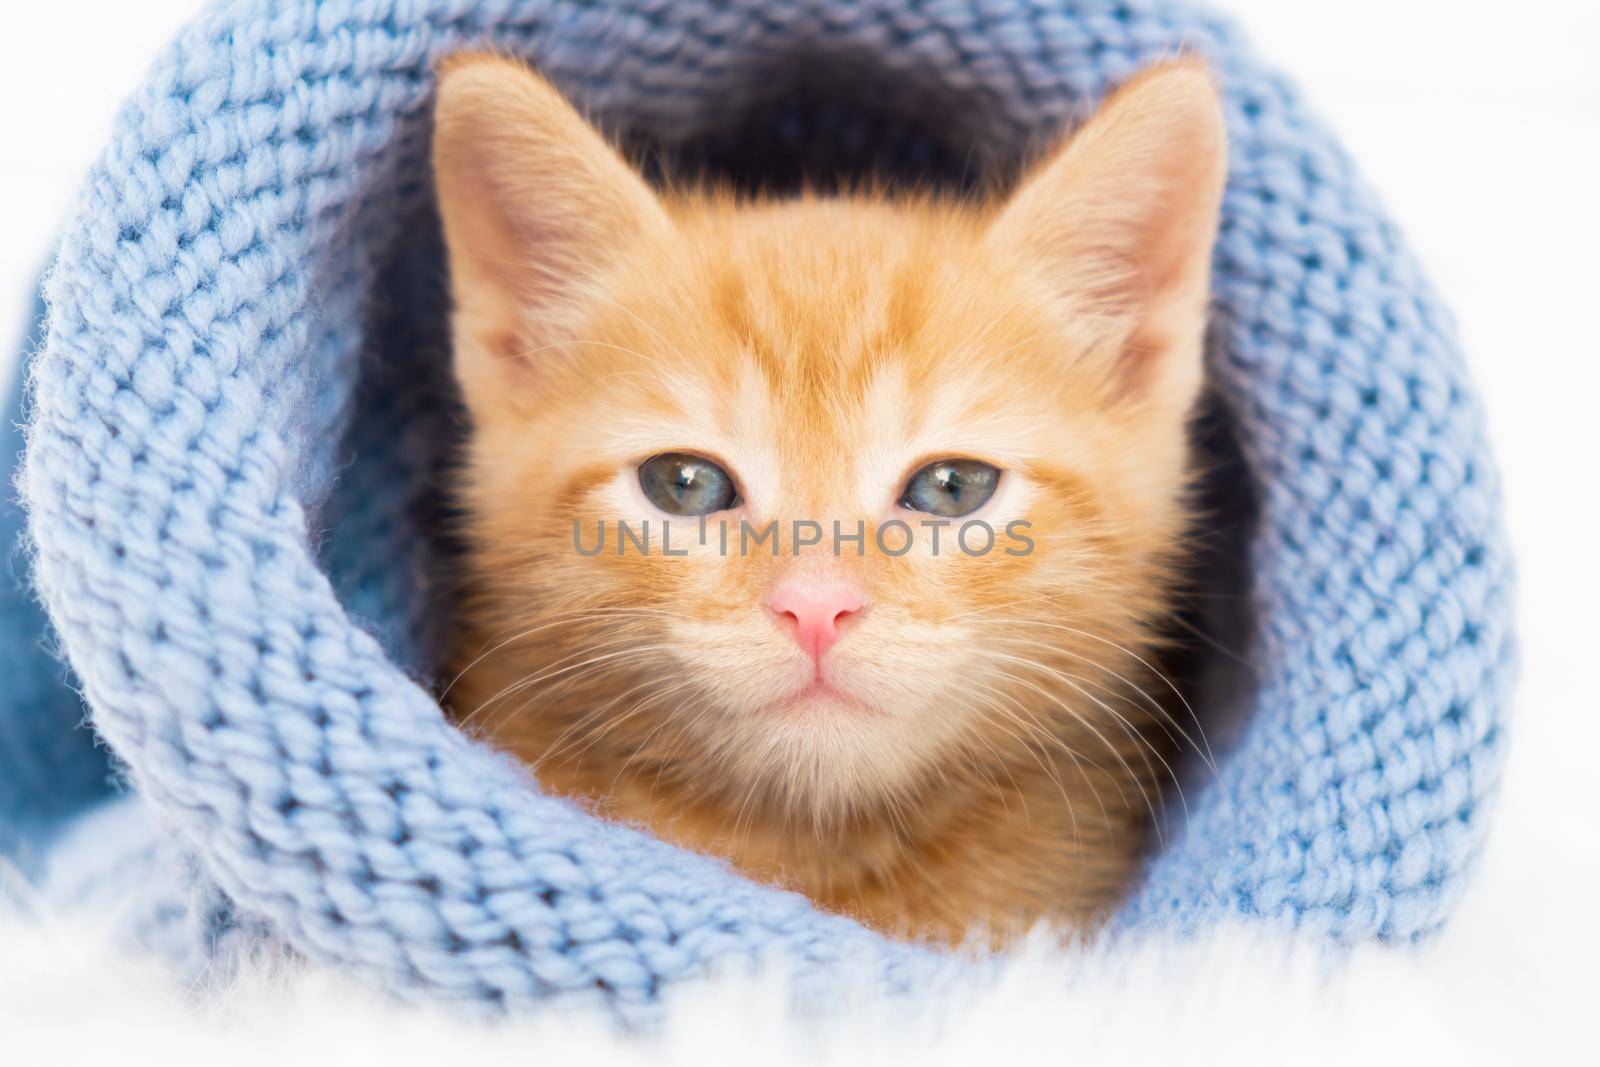 Small ginger tabby kitten is sweetly basking and looking at the camera in a knitted blue hat with copyspace. Soft and cozy. Christmas, home comfort and new year holidays, Valentines Day concept by chelmicky